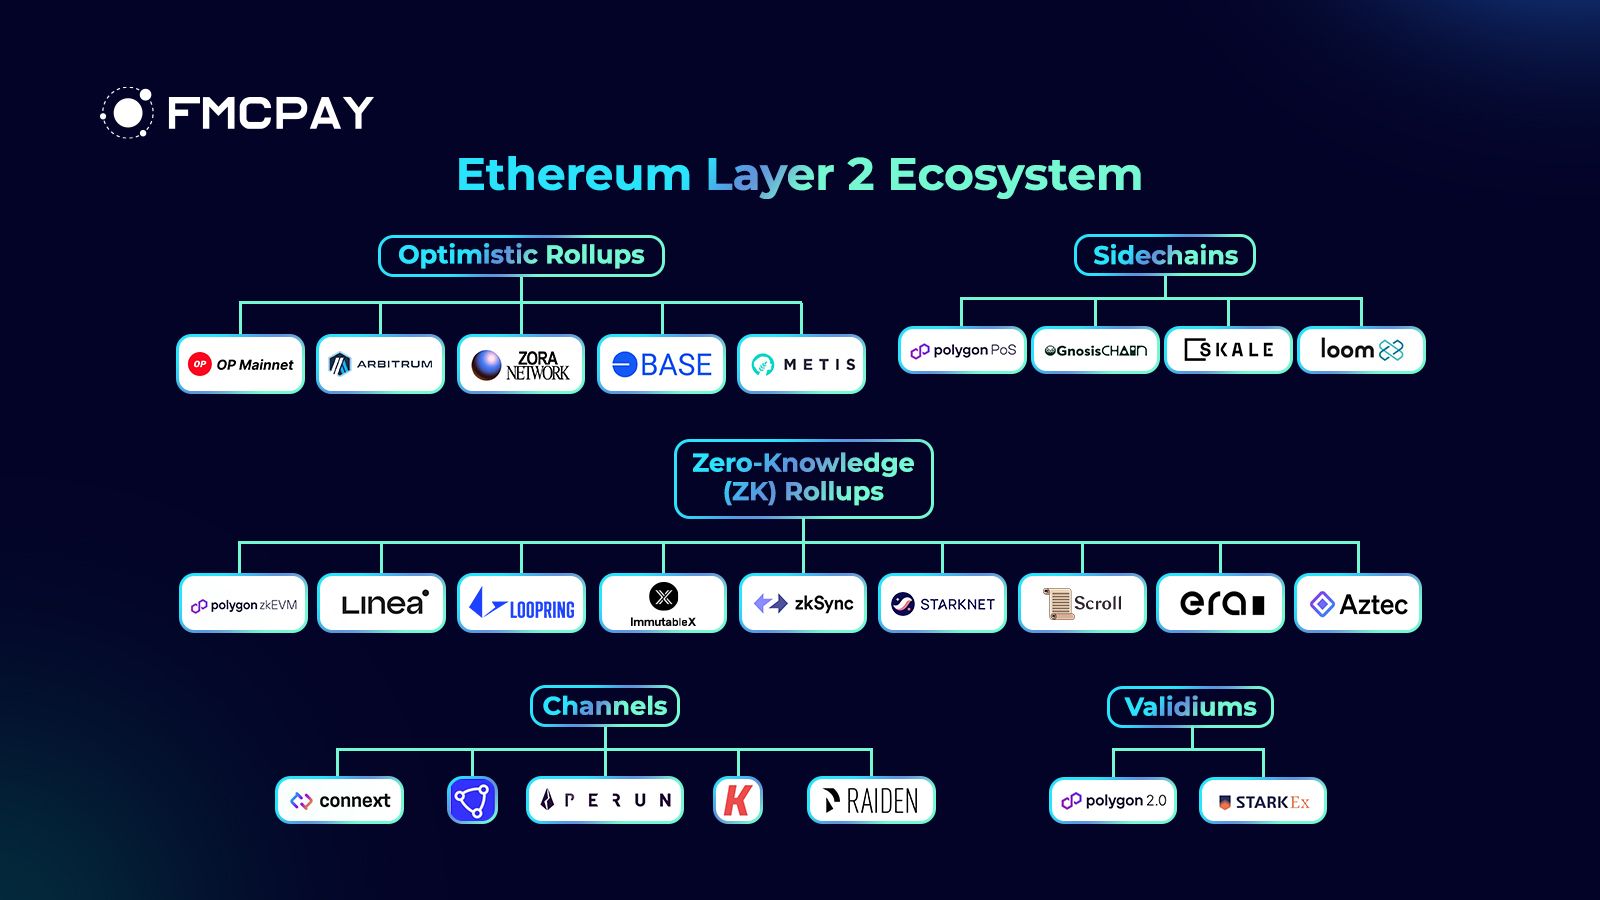 fmcpay type of ethereum layer 2